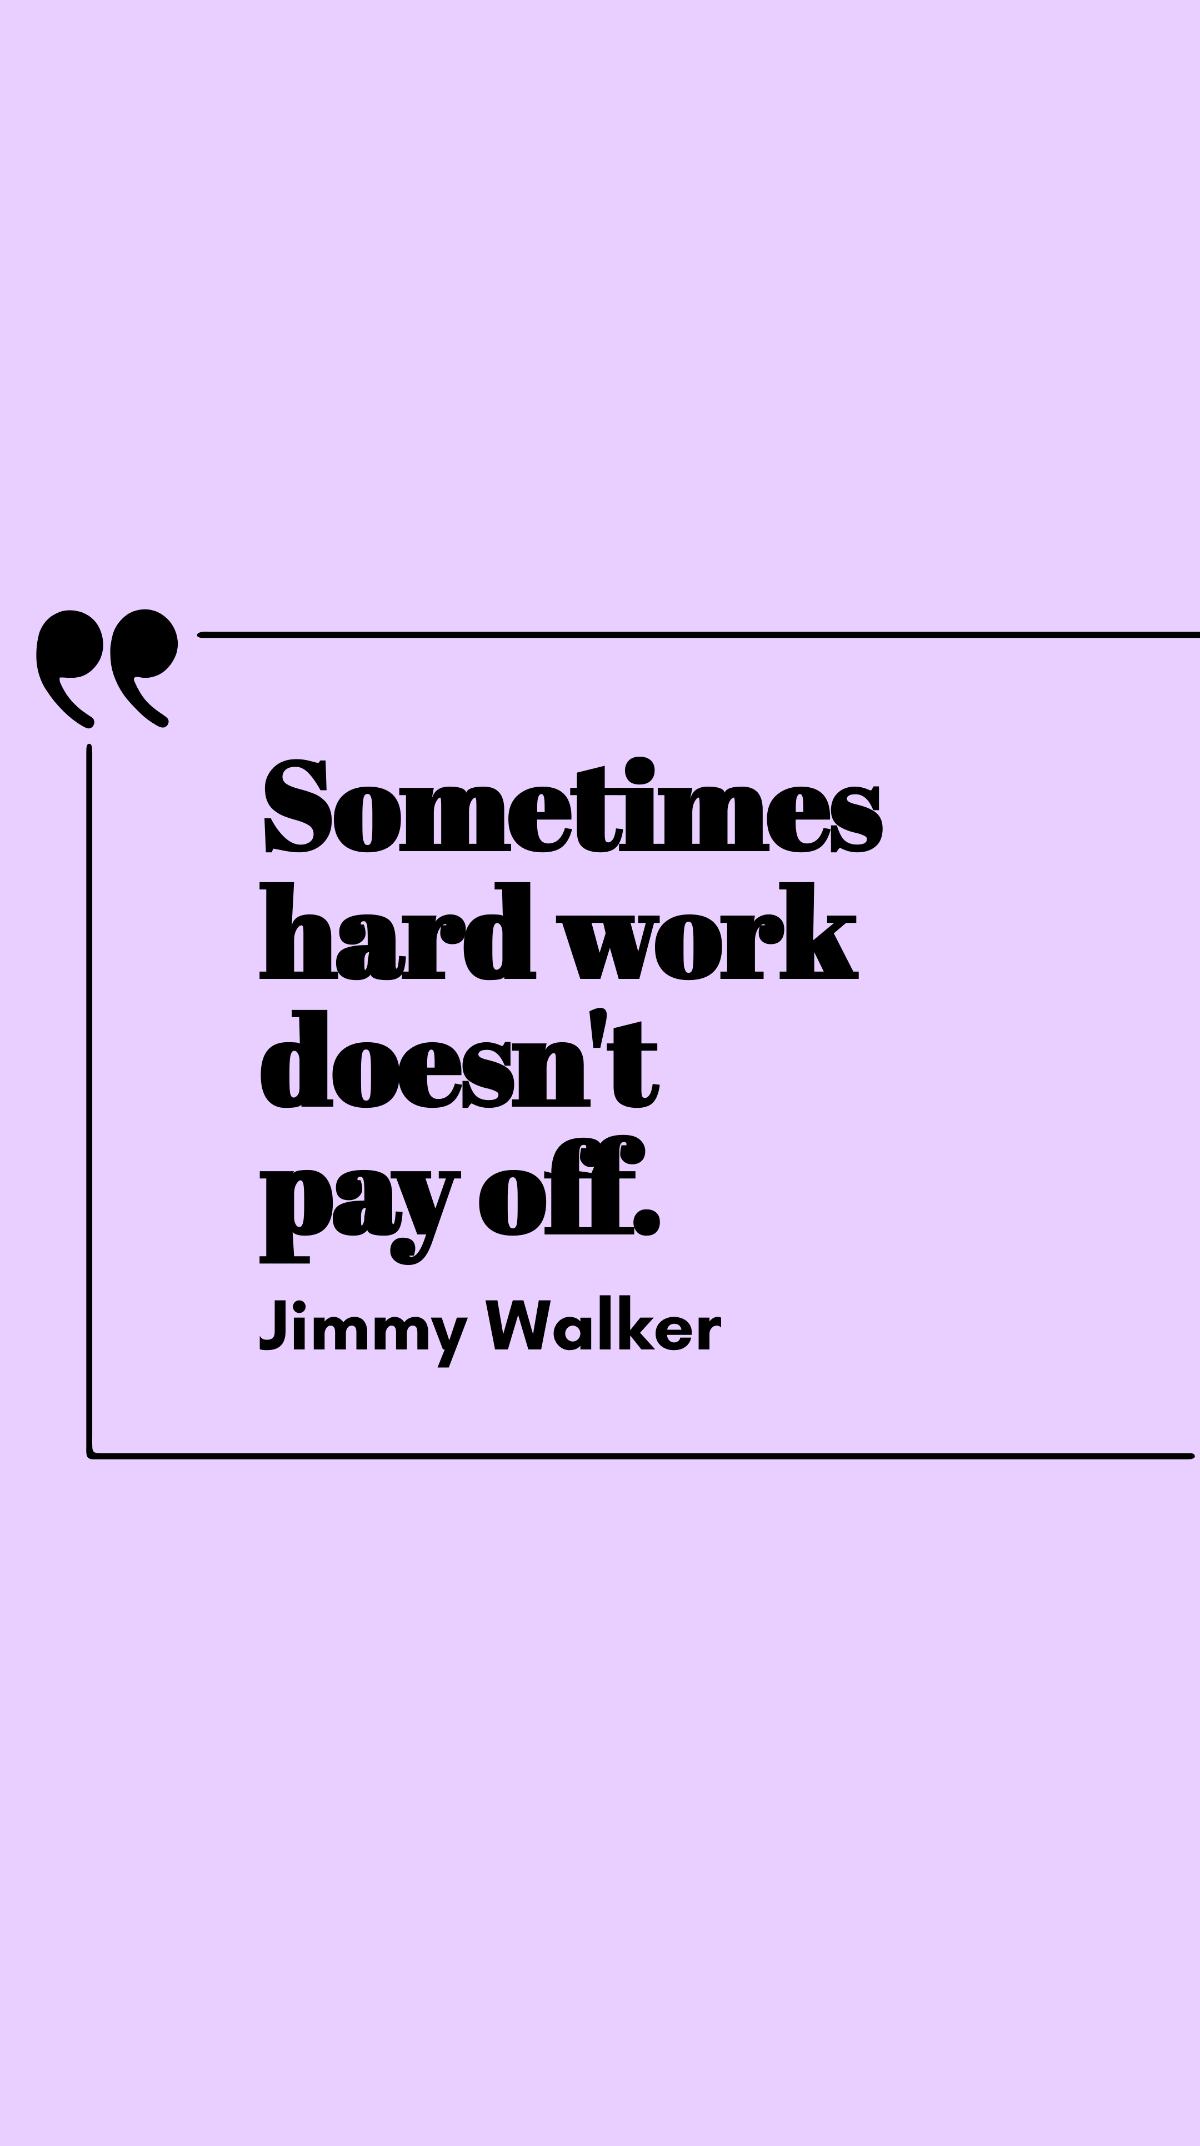 Free Jimmy Walker - Sometimes hard work doesn't pay off. Template